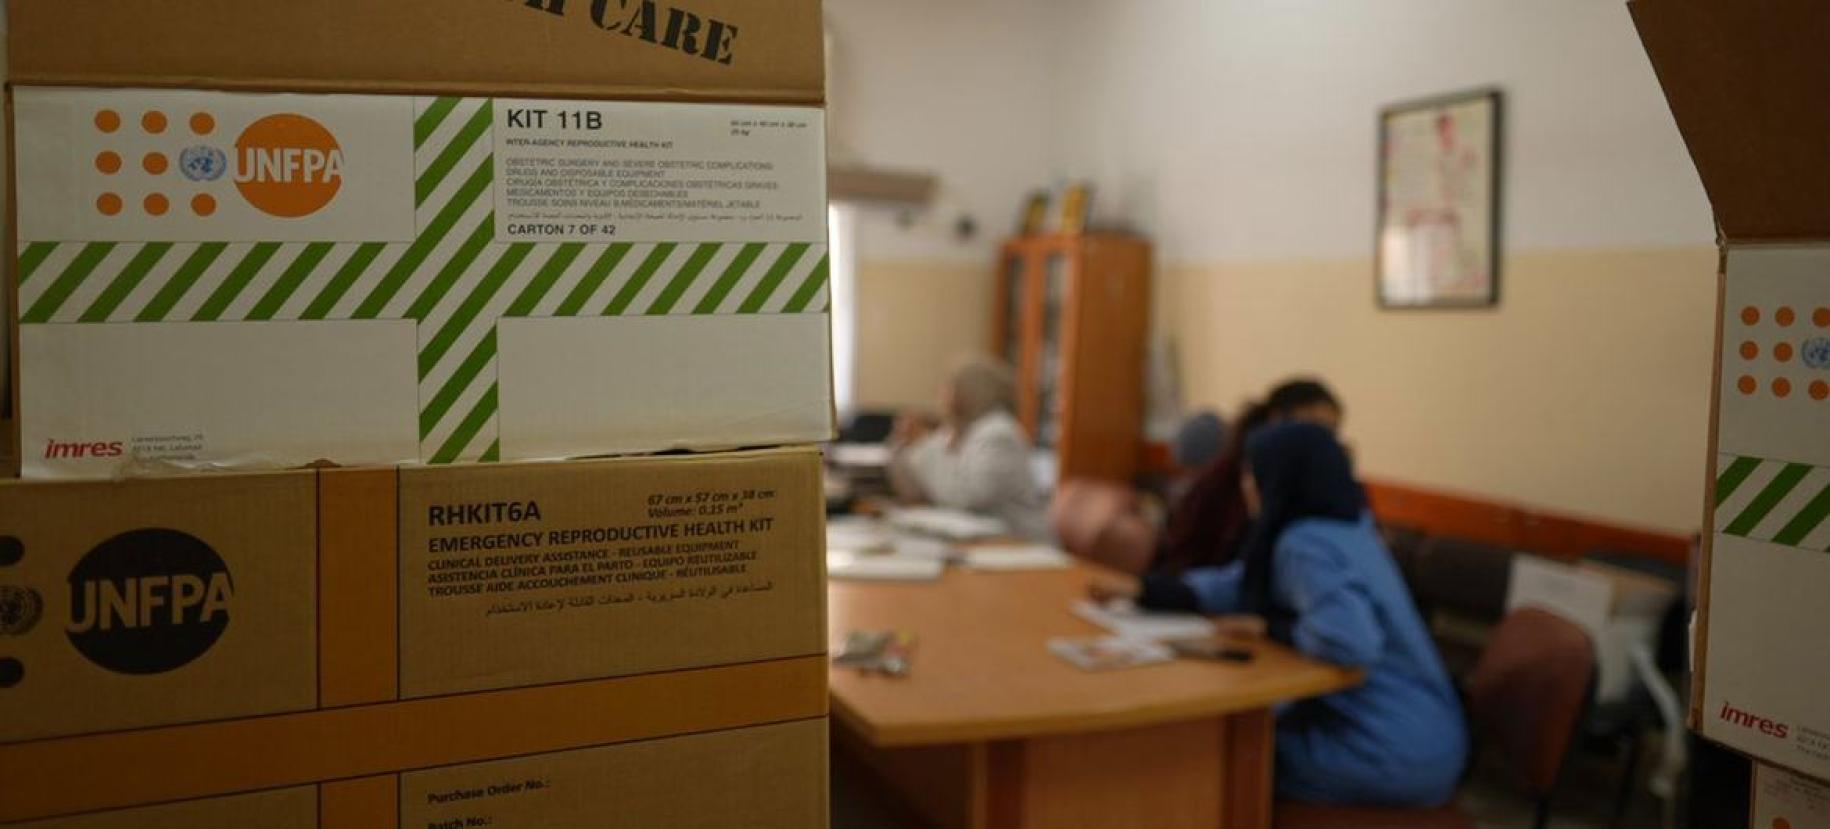 UNFPA kits and boxes, with women, not in focus, seated and talking in the background. 